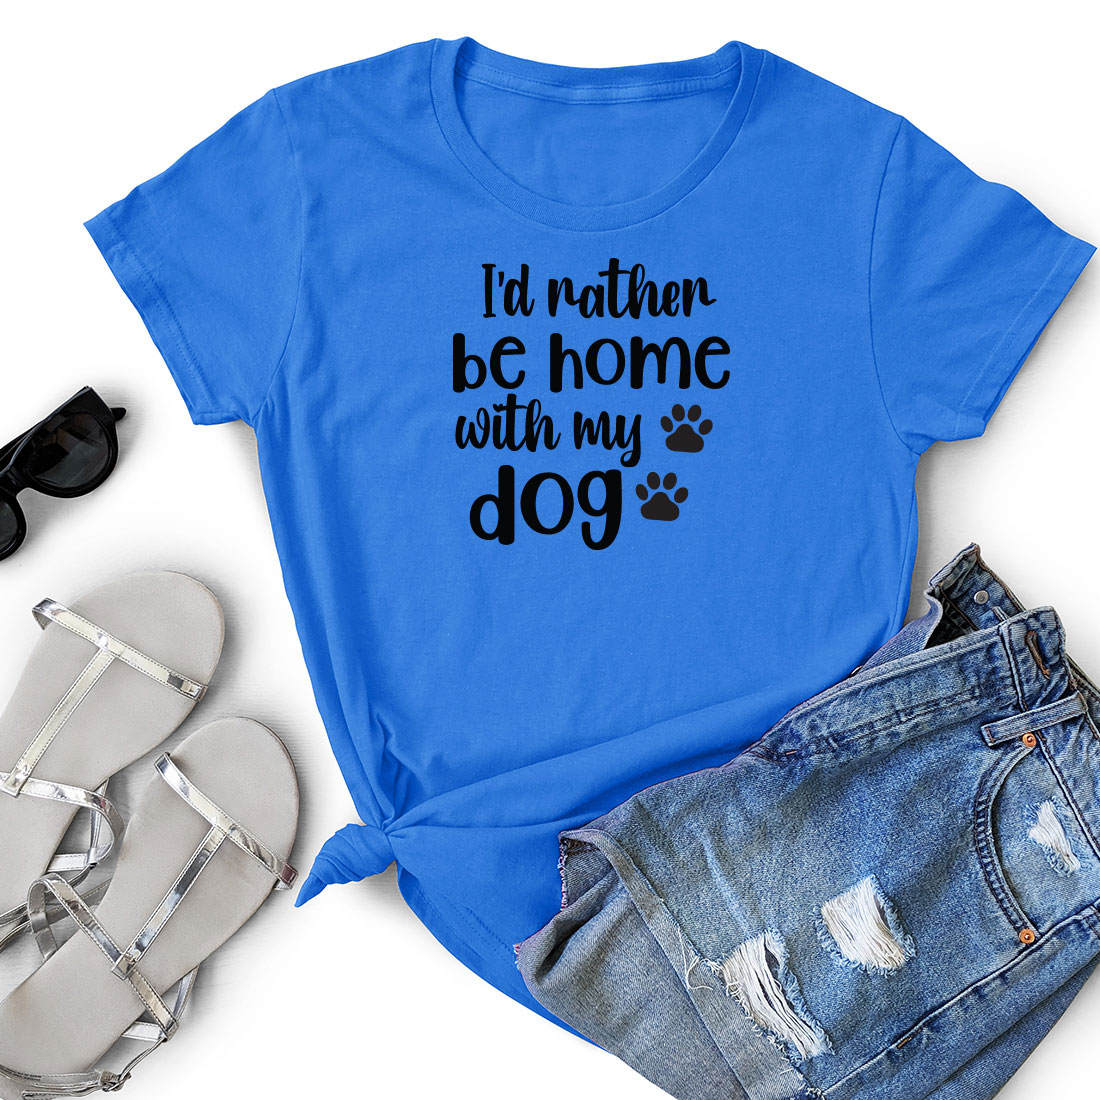 T - shirt that says i'd rather be home with my dog.